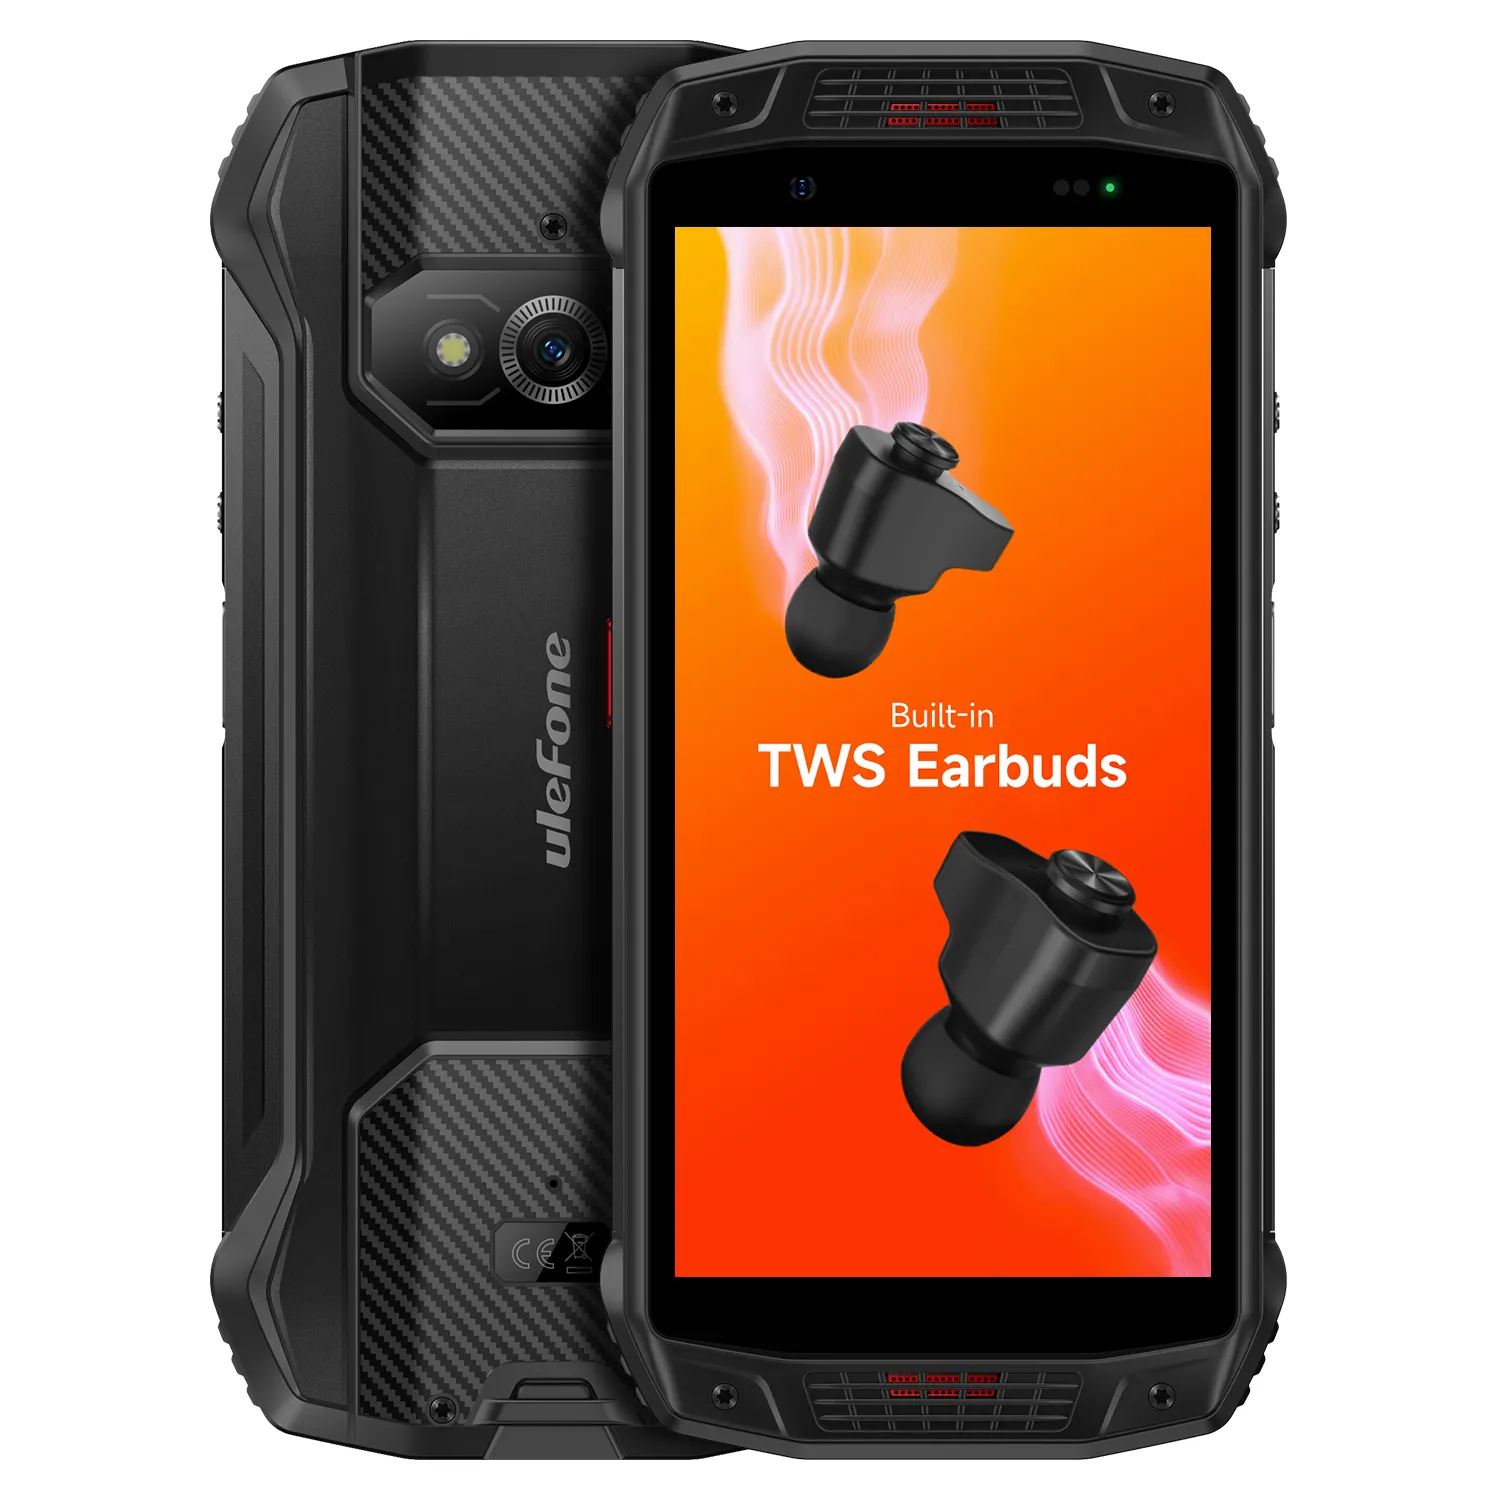 New Arrival Android 12 Ulefone Armor 15 Mobile Phone Rugged Built-inTWS Earbuds Waterproof Phone 6600mAh 128GB NFC 5G